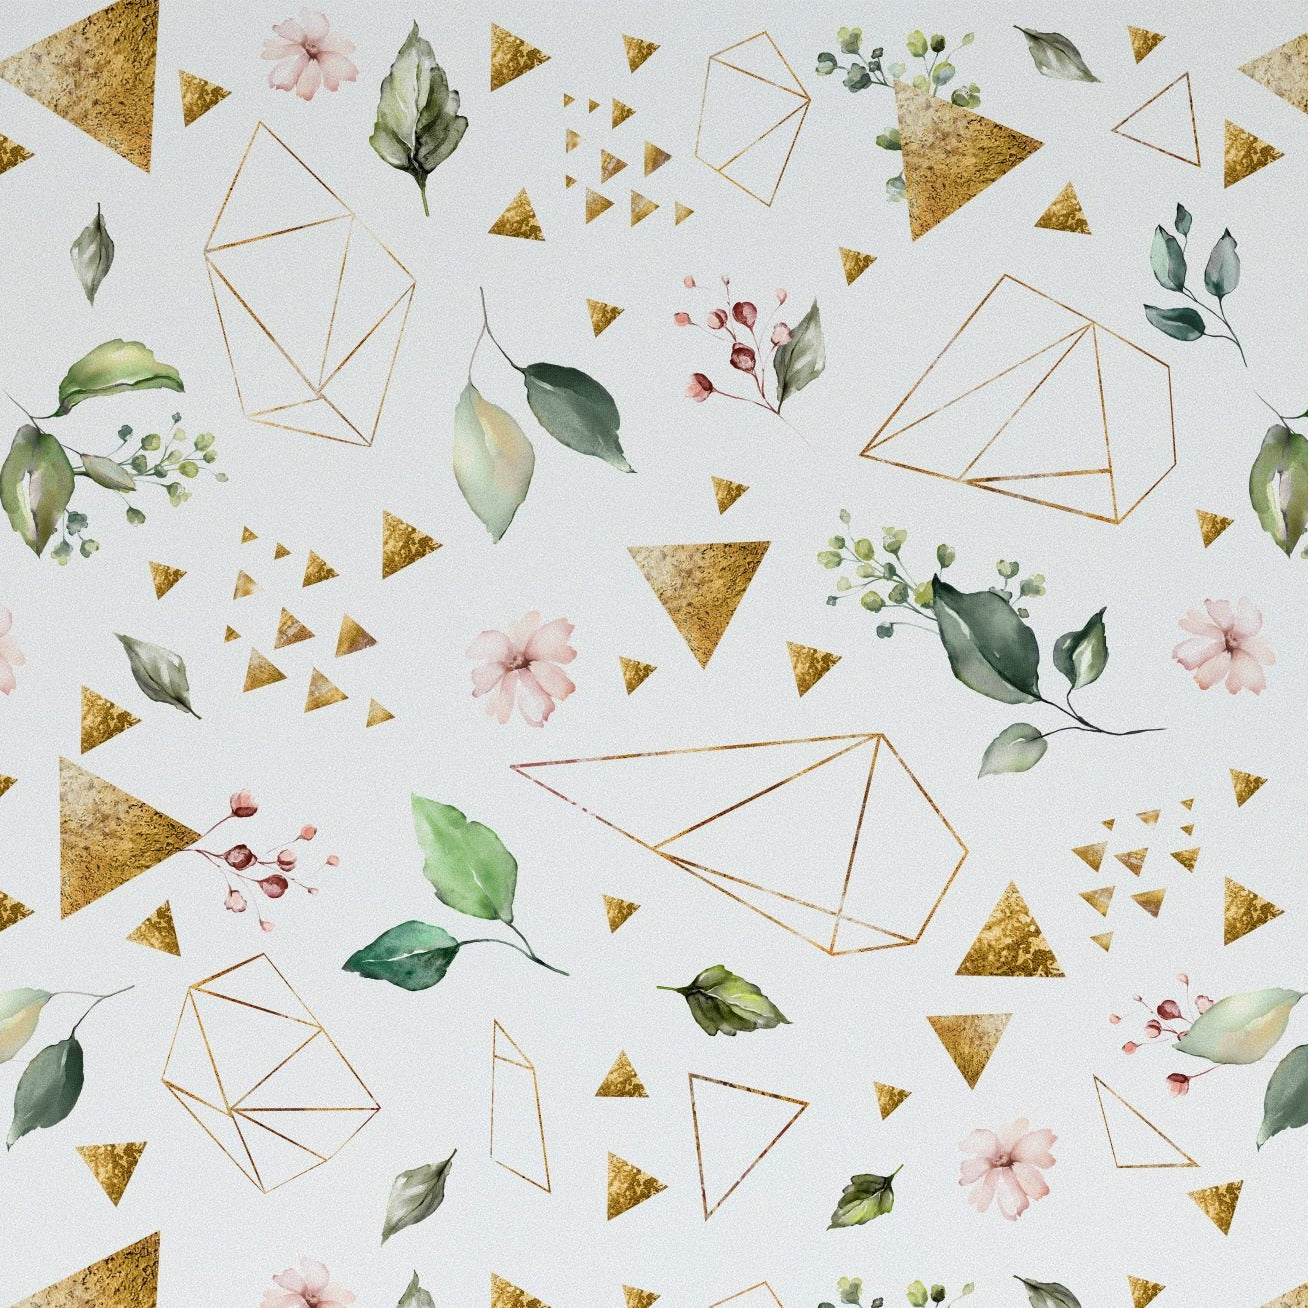 A seamless patterned wallpaper featuring a soft color palette with watercolor illustrations of various green leaves, pink and white flowers, interspersed with geometric shapes like triangles and diamonds in gold foil and outlined styles.